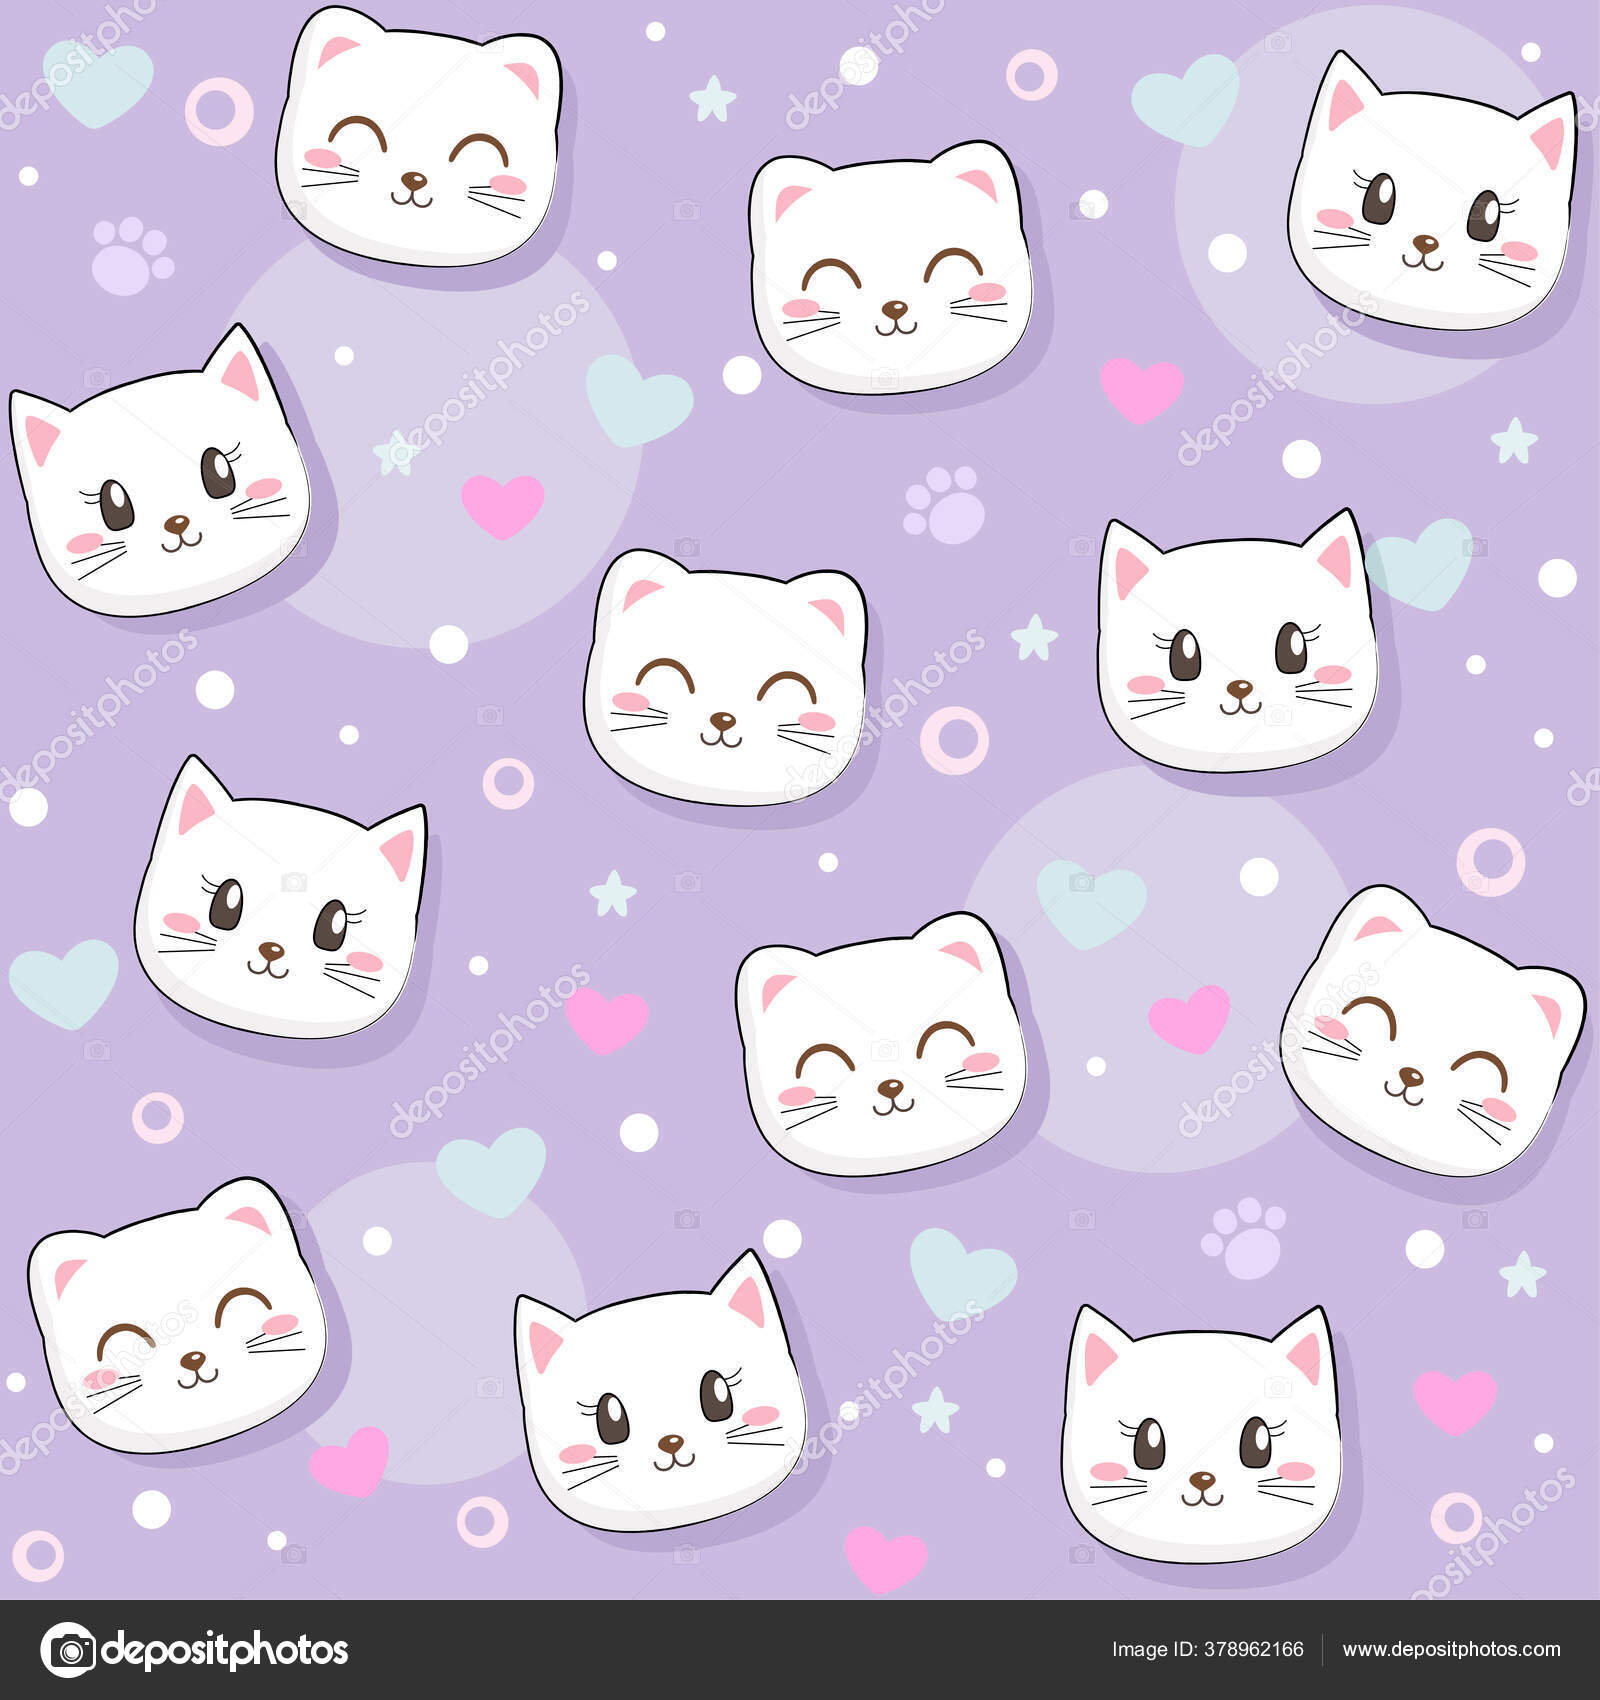 icons for you  Cute cats, Baby cats, Cute cat wallpaper